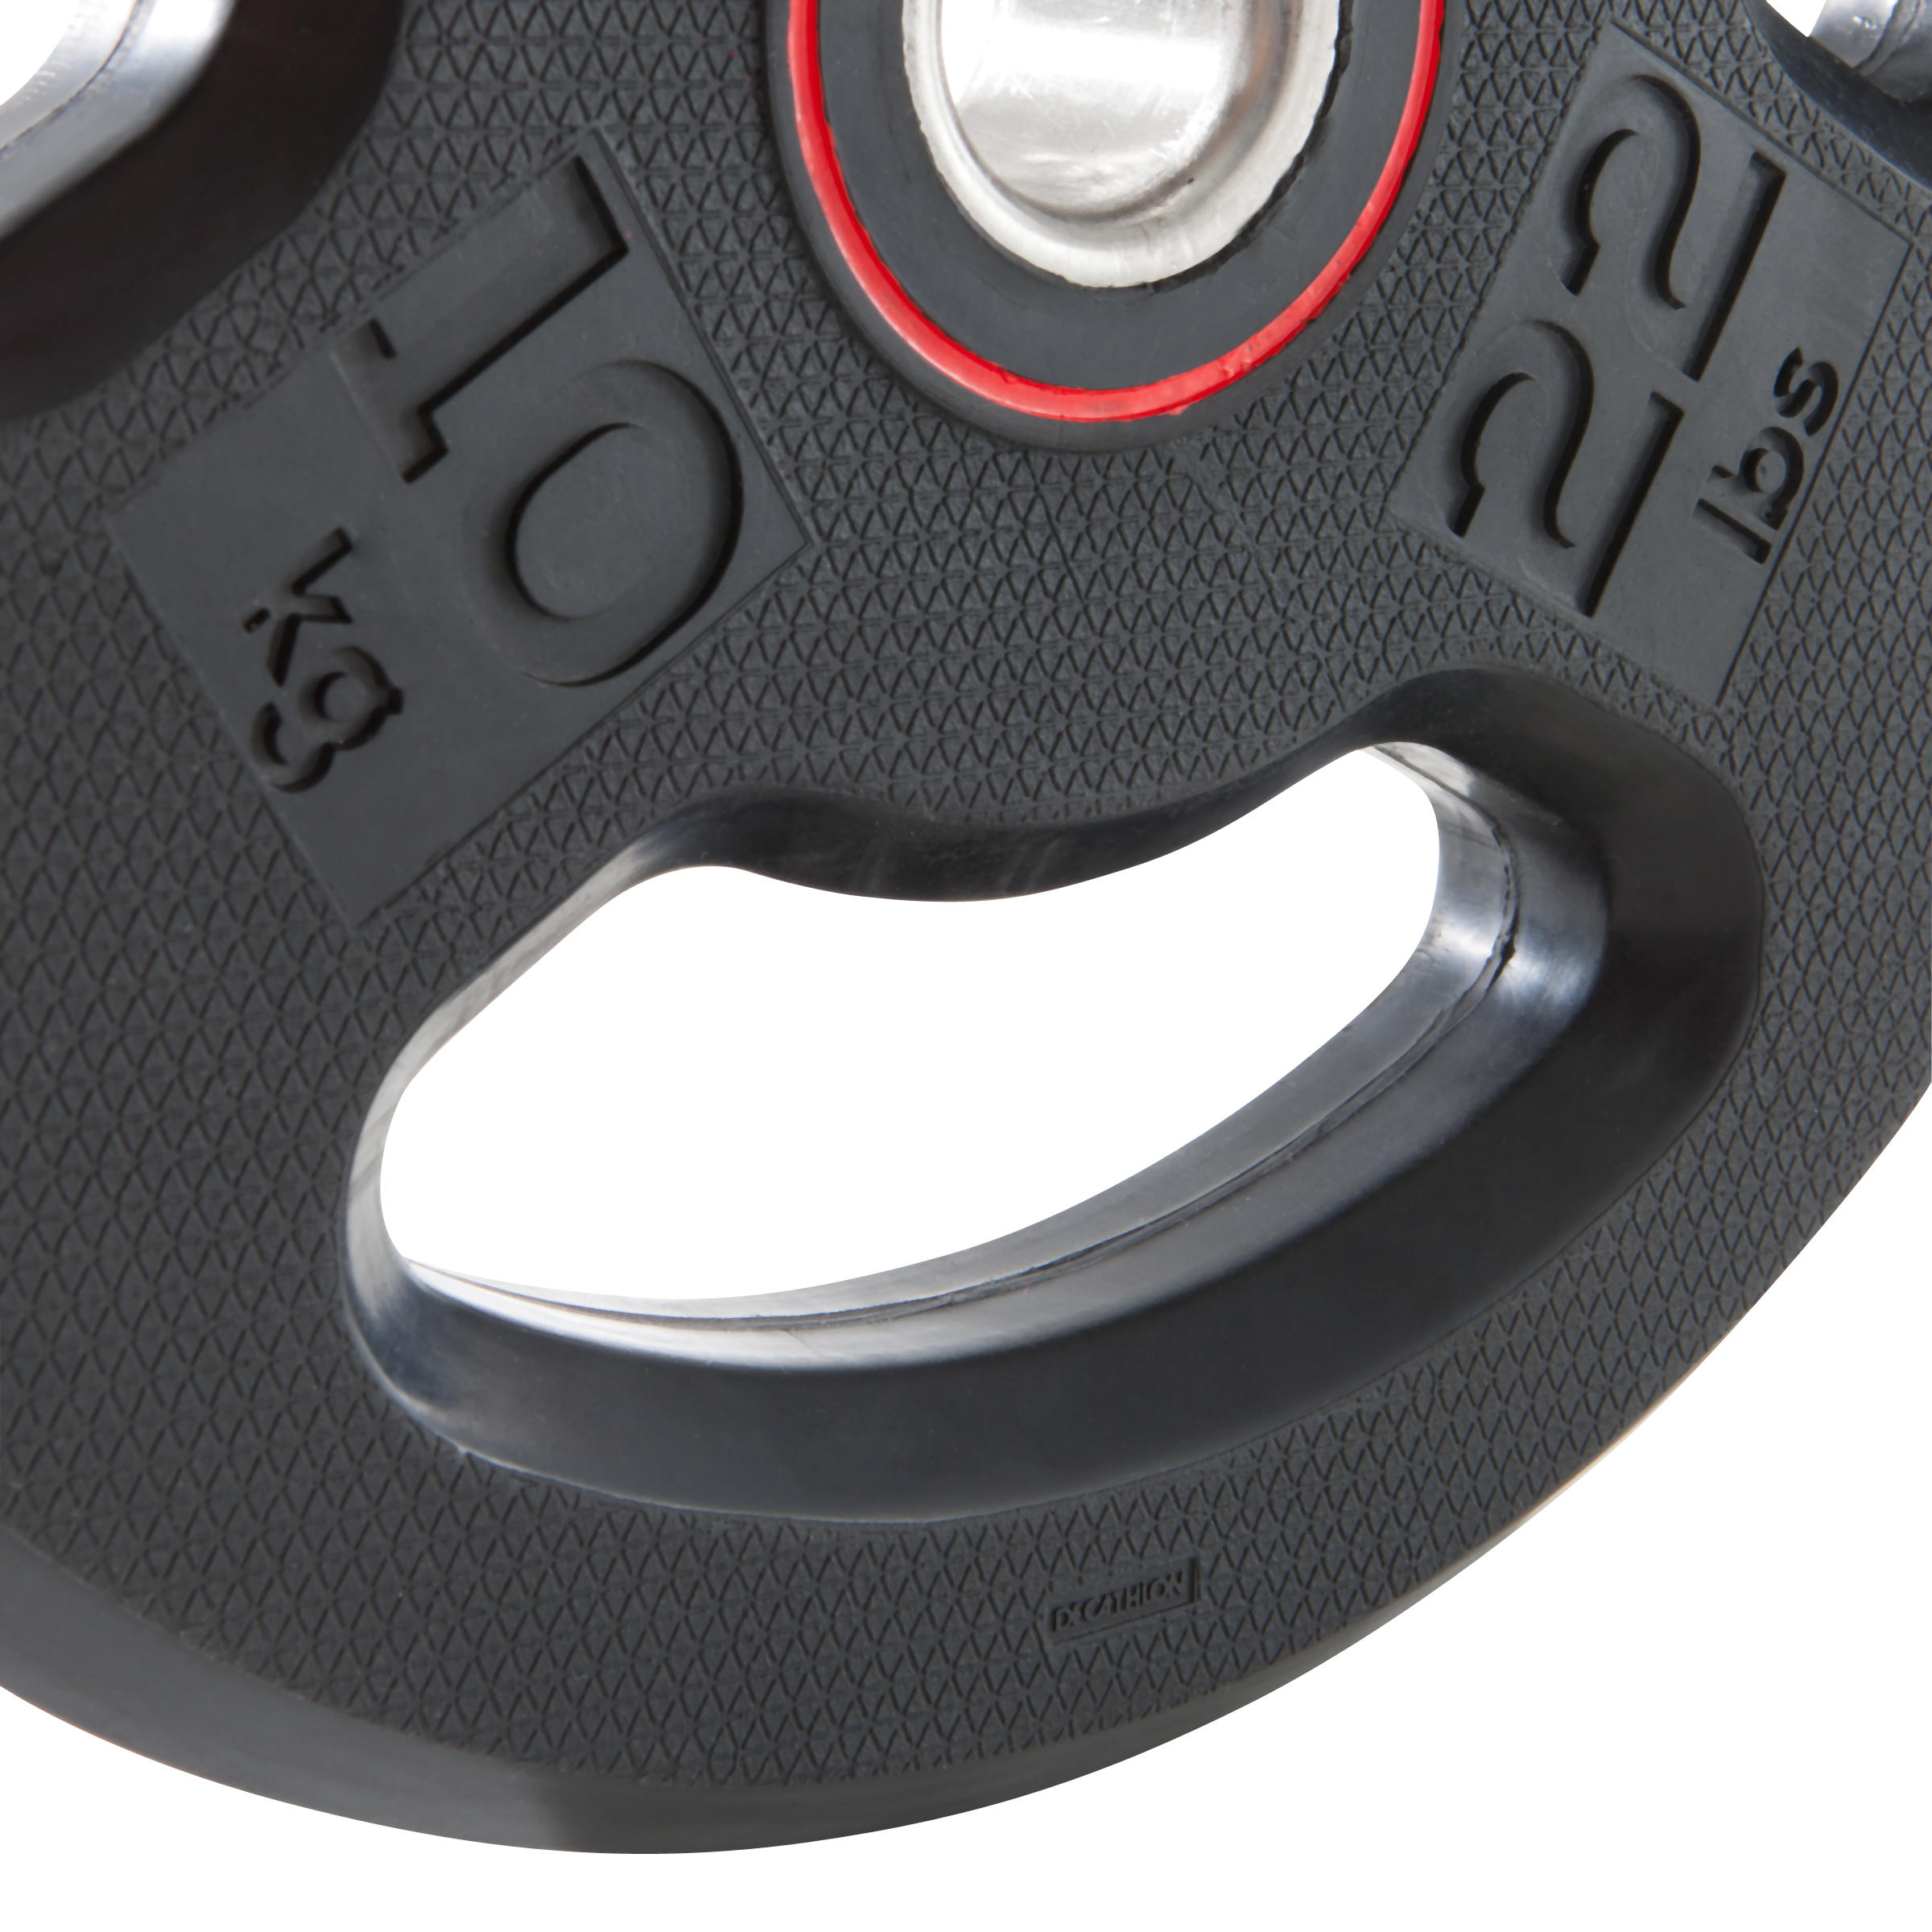 10 kg (22 lb) Rubber Weight Plate with Handles - CORENGTH